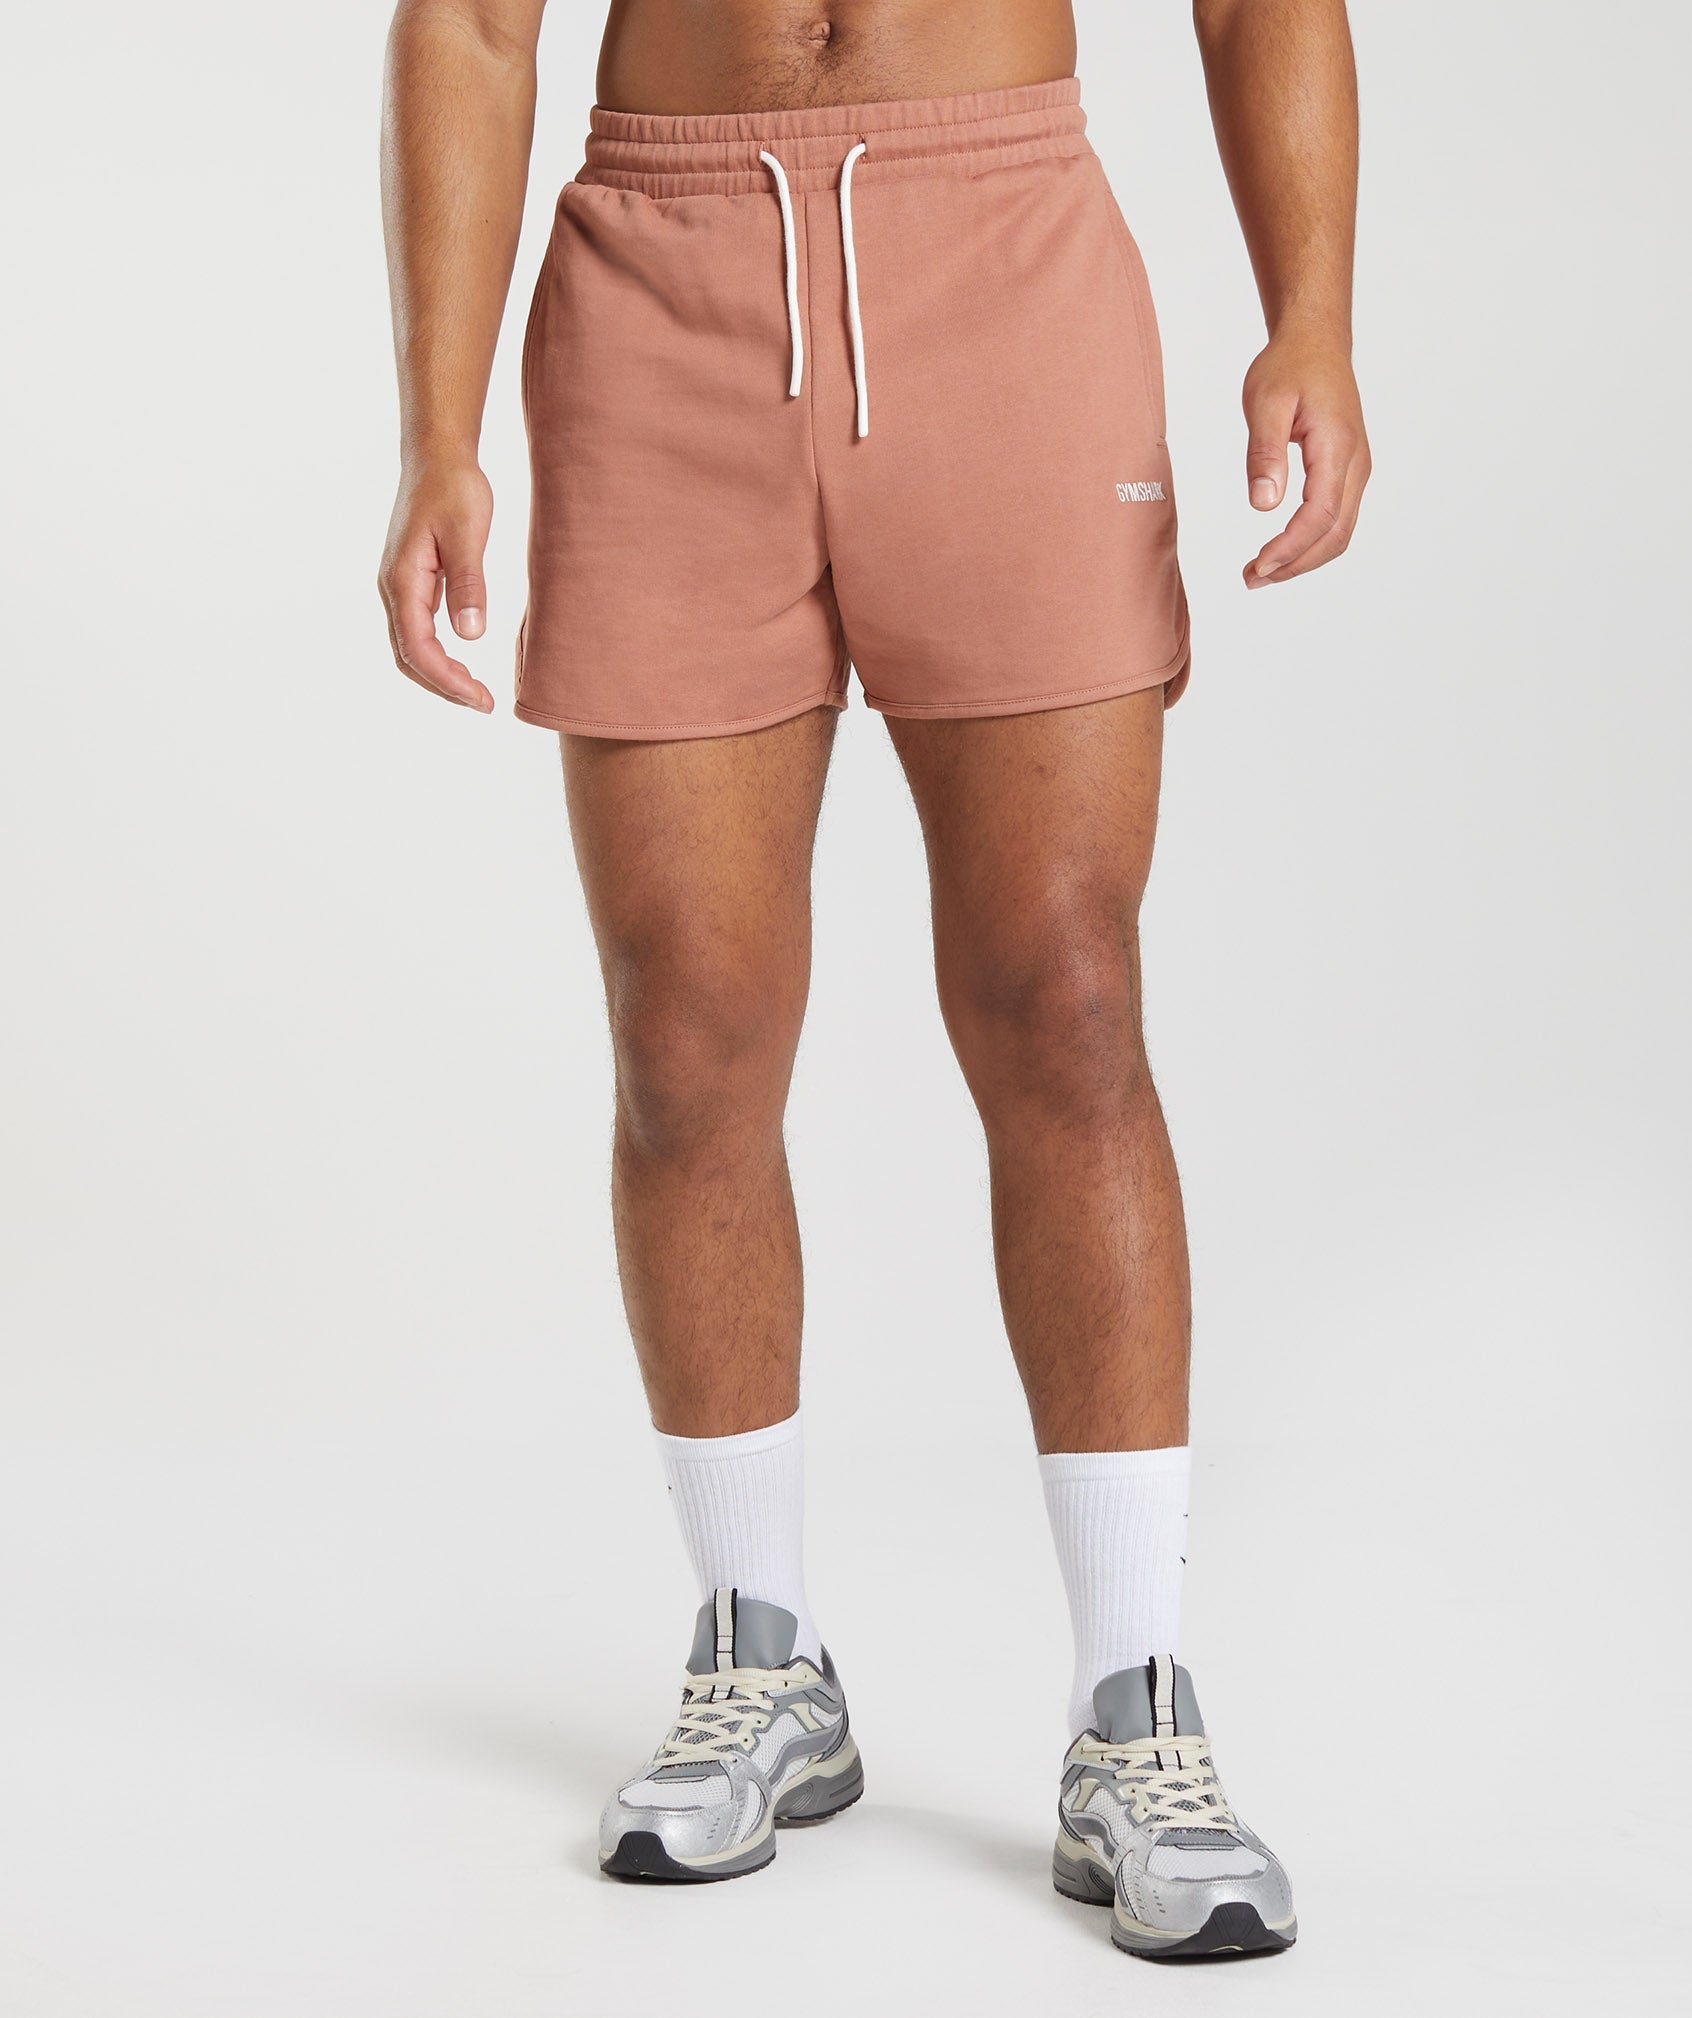 Rest Day Sweats 4'' Lounge Shorts, 43% OFF